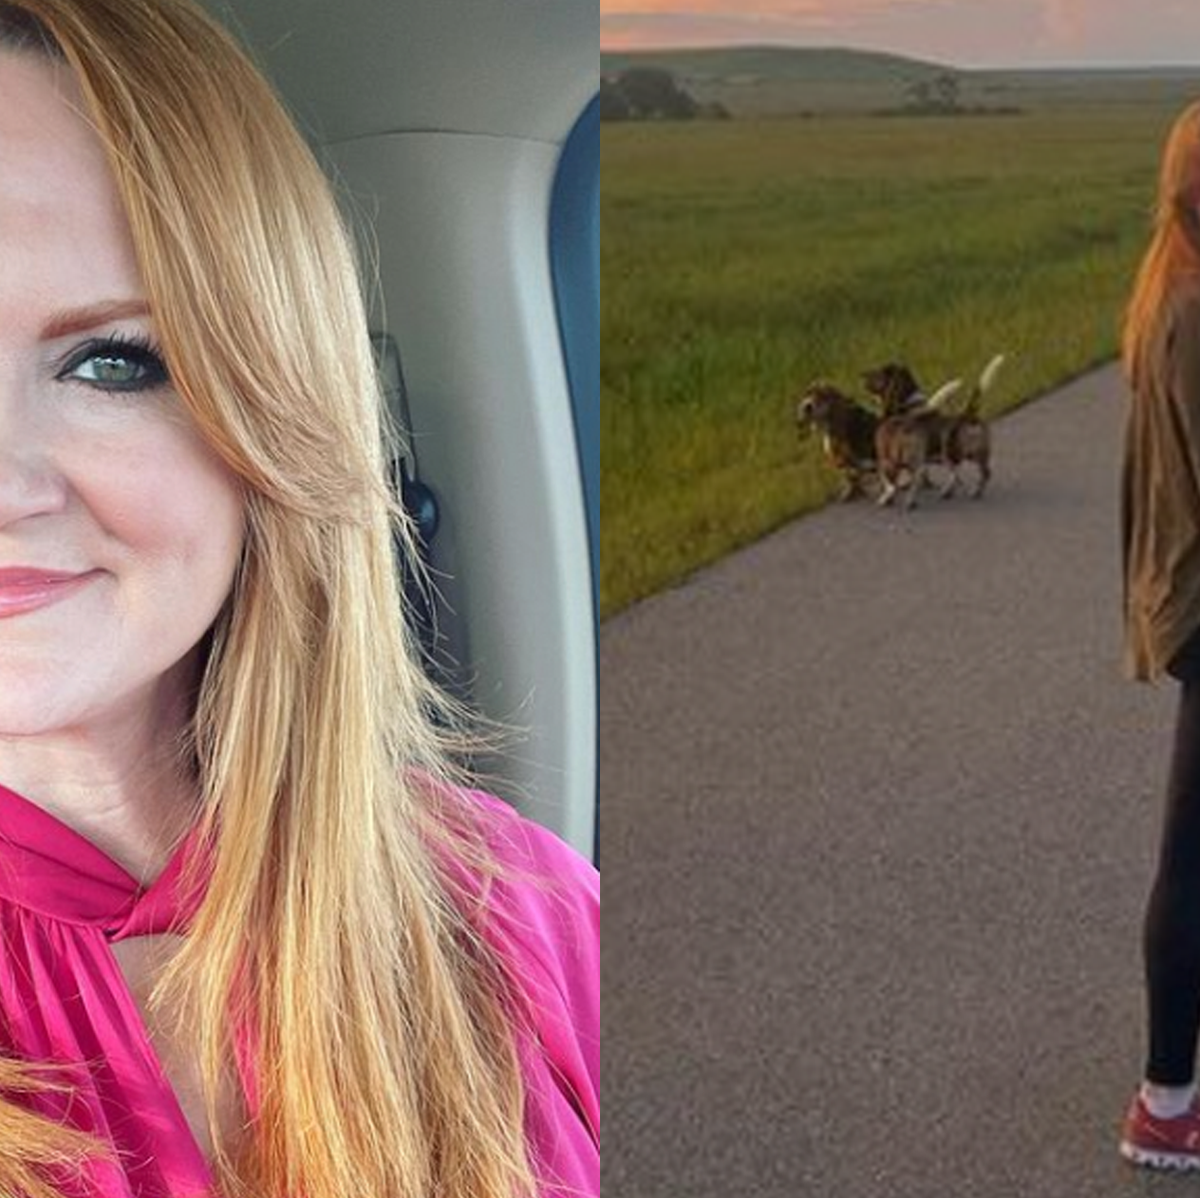 What 'The Pioneer Woman' Ree Drummond Eats in a Day